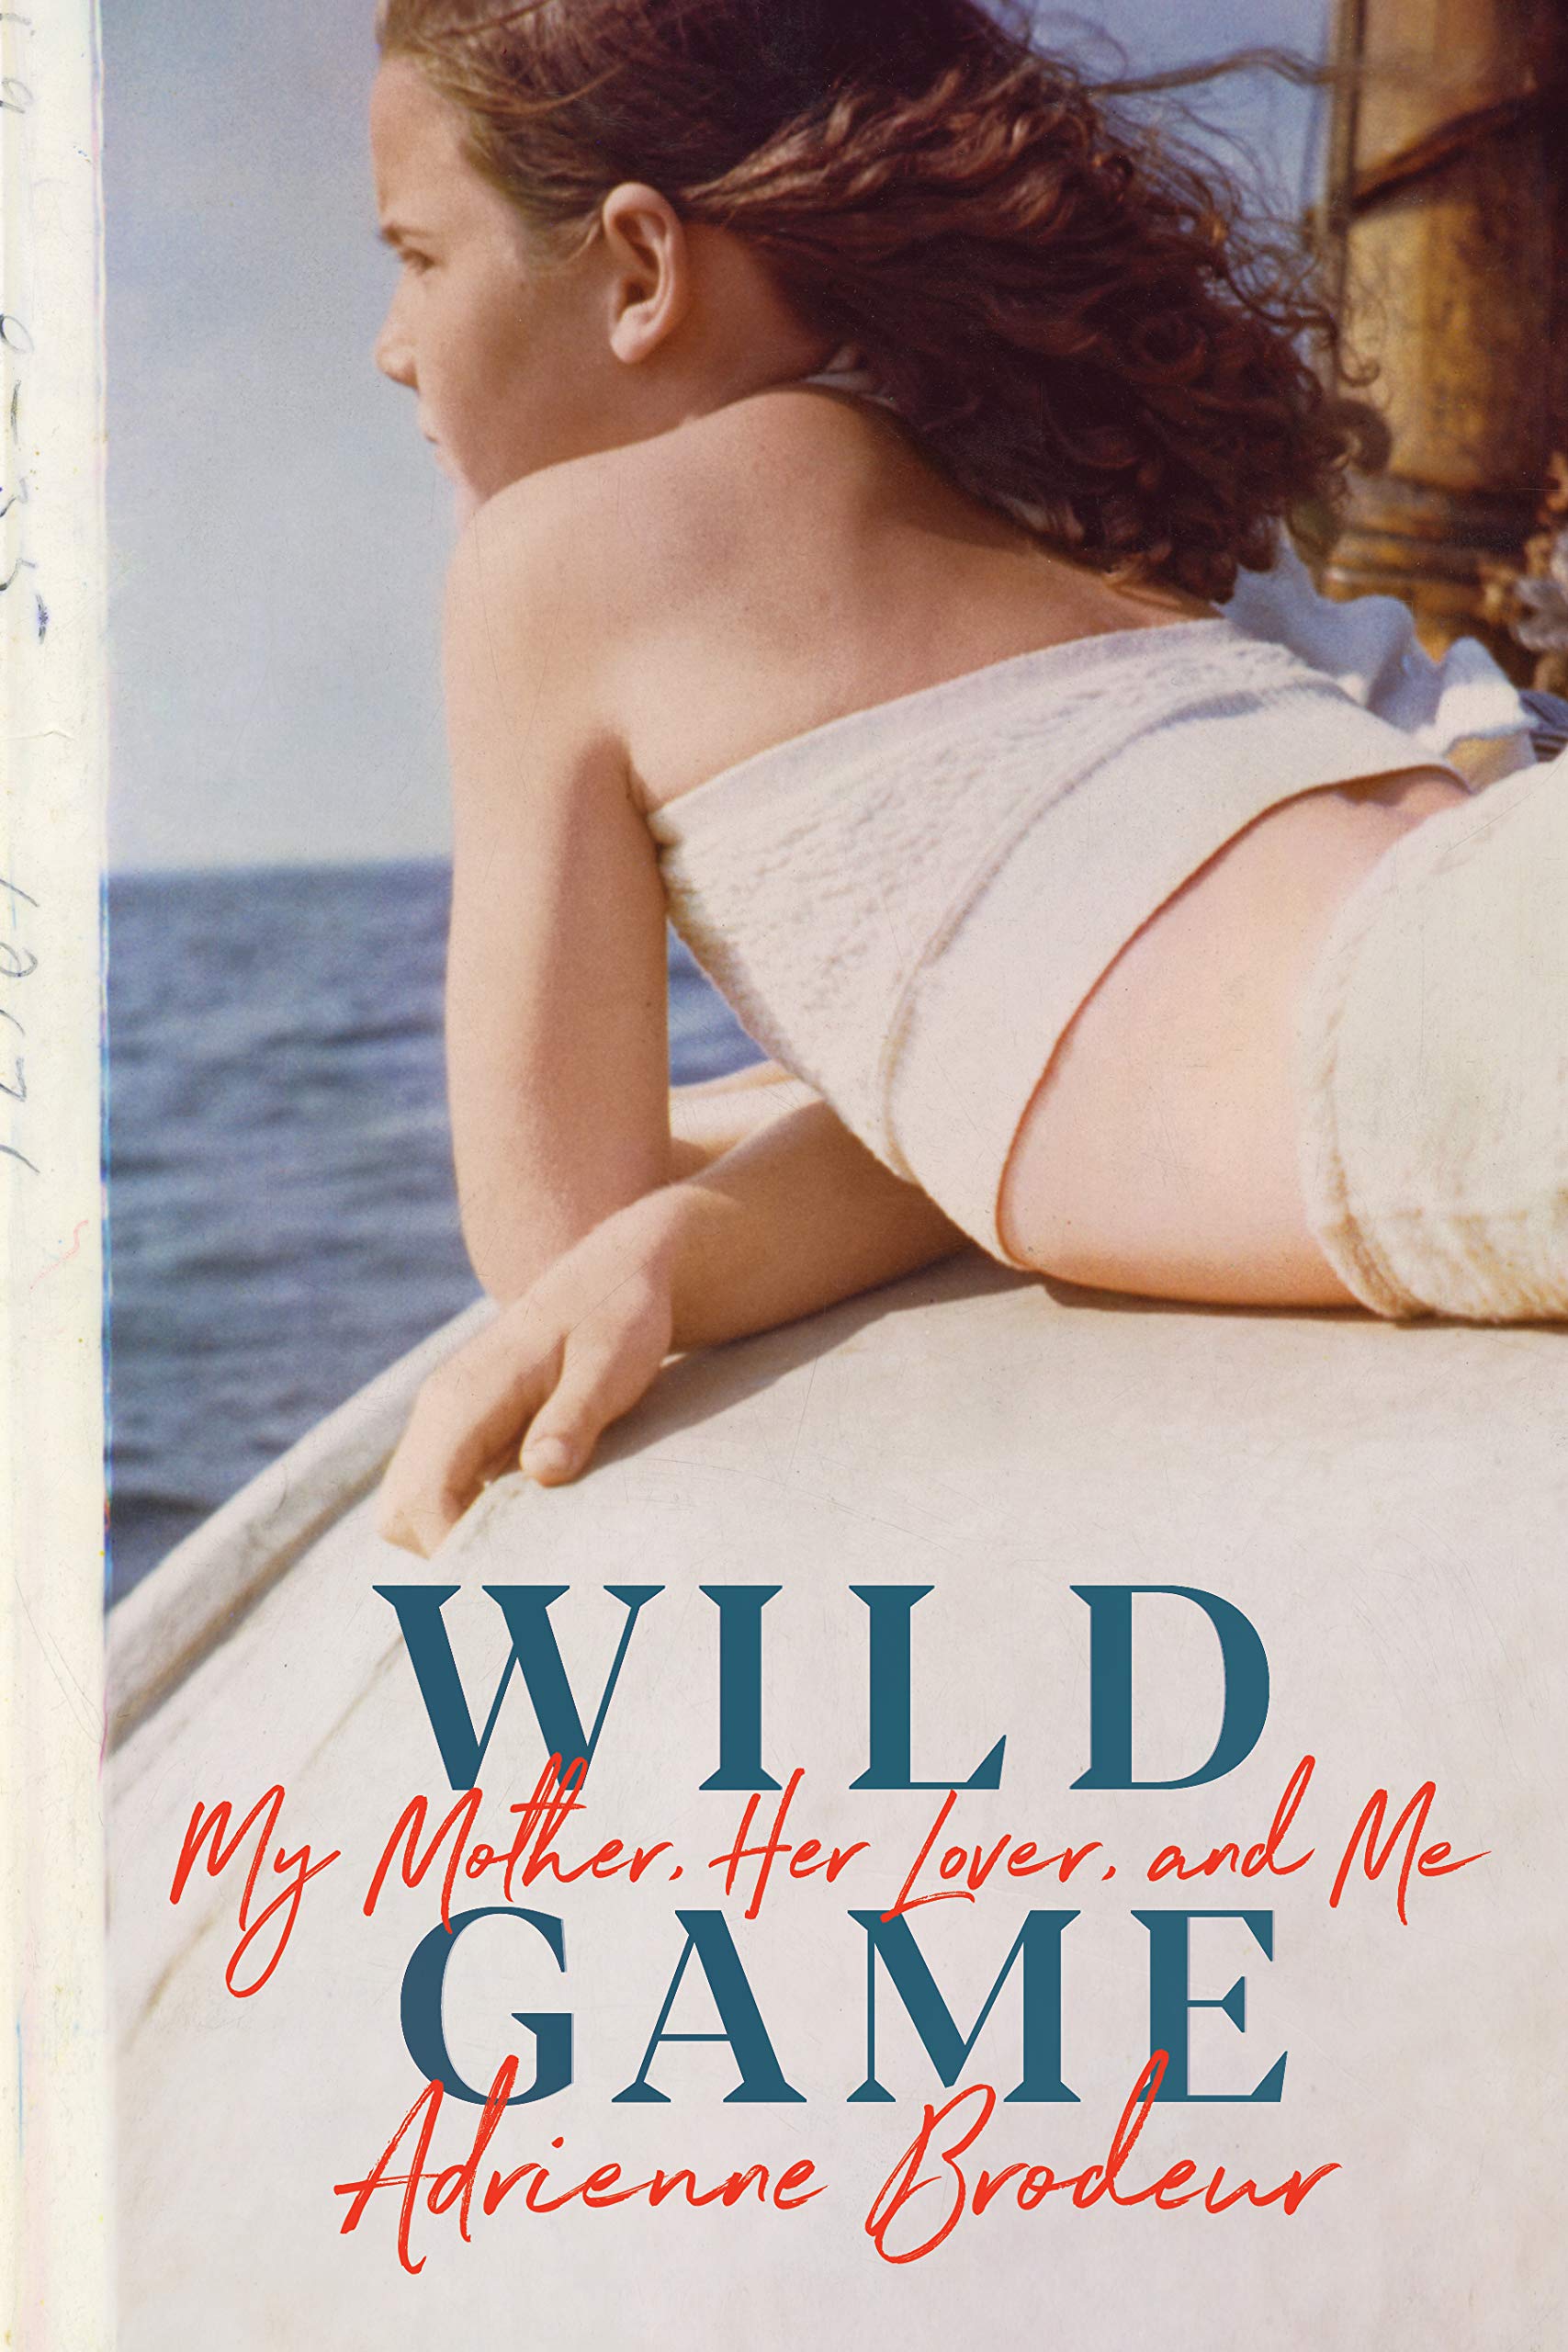 Wild Game: My Mother, Her Lover, and Me